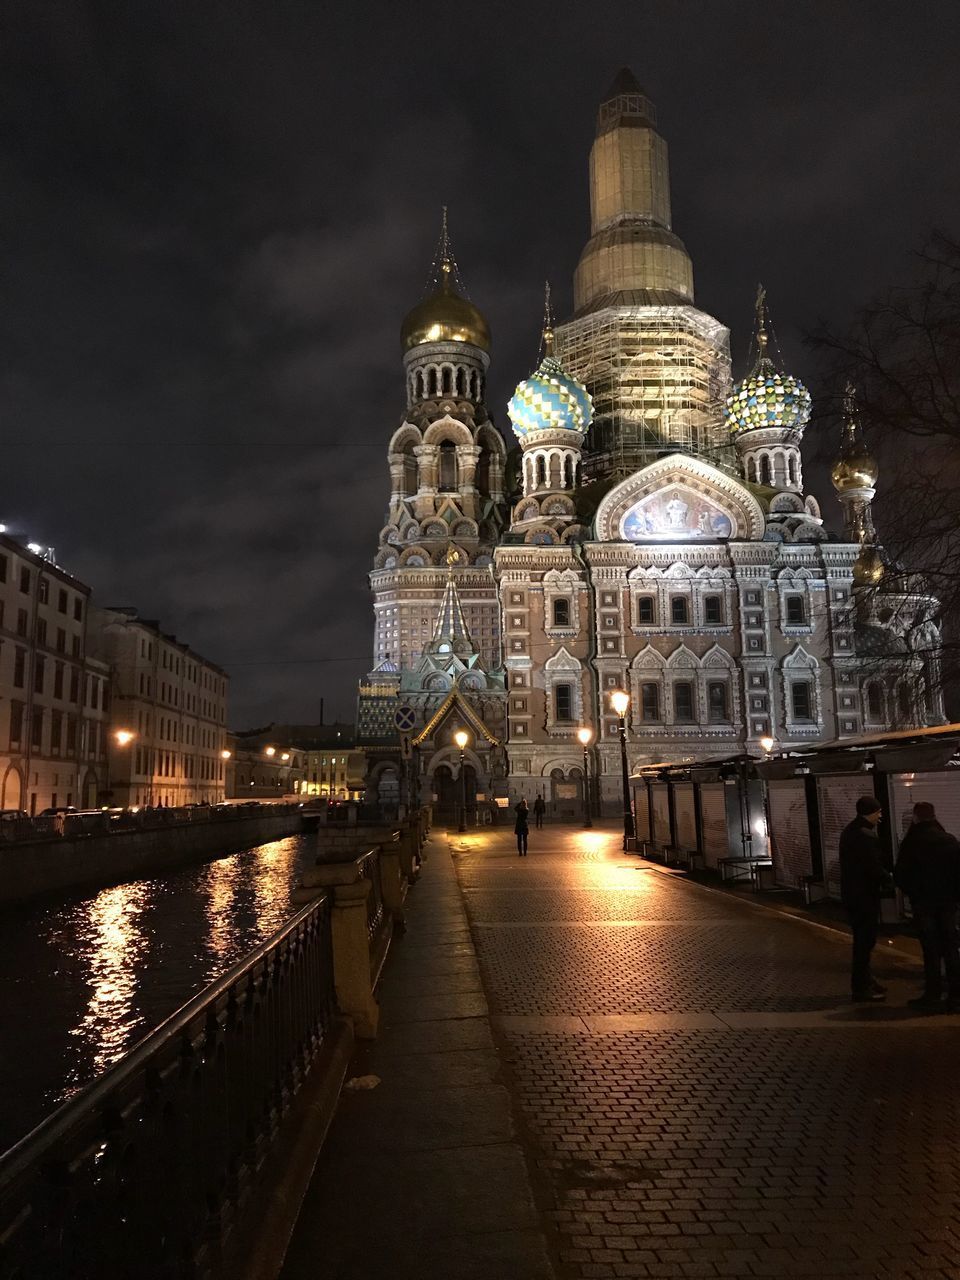 ILLUMINATED CATHEDRAL IN CITY AT NIGHT